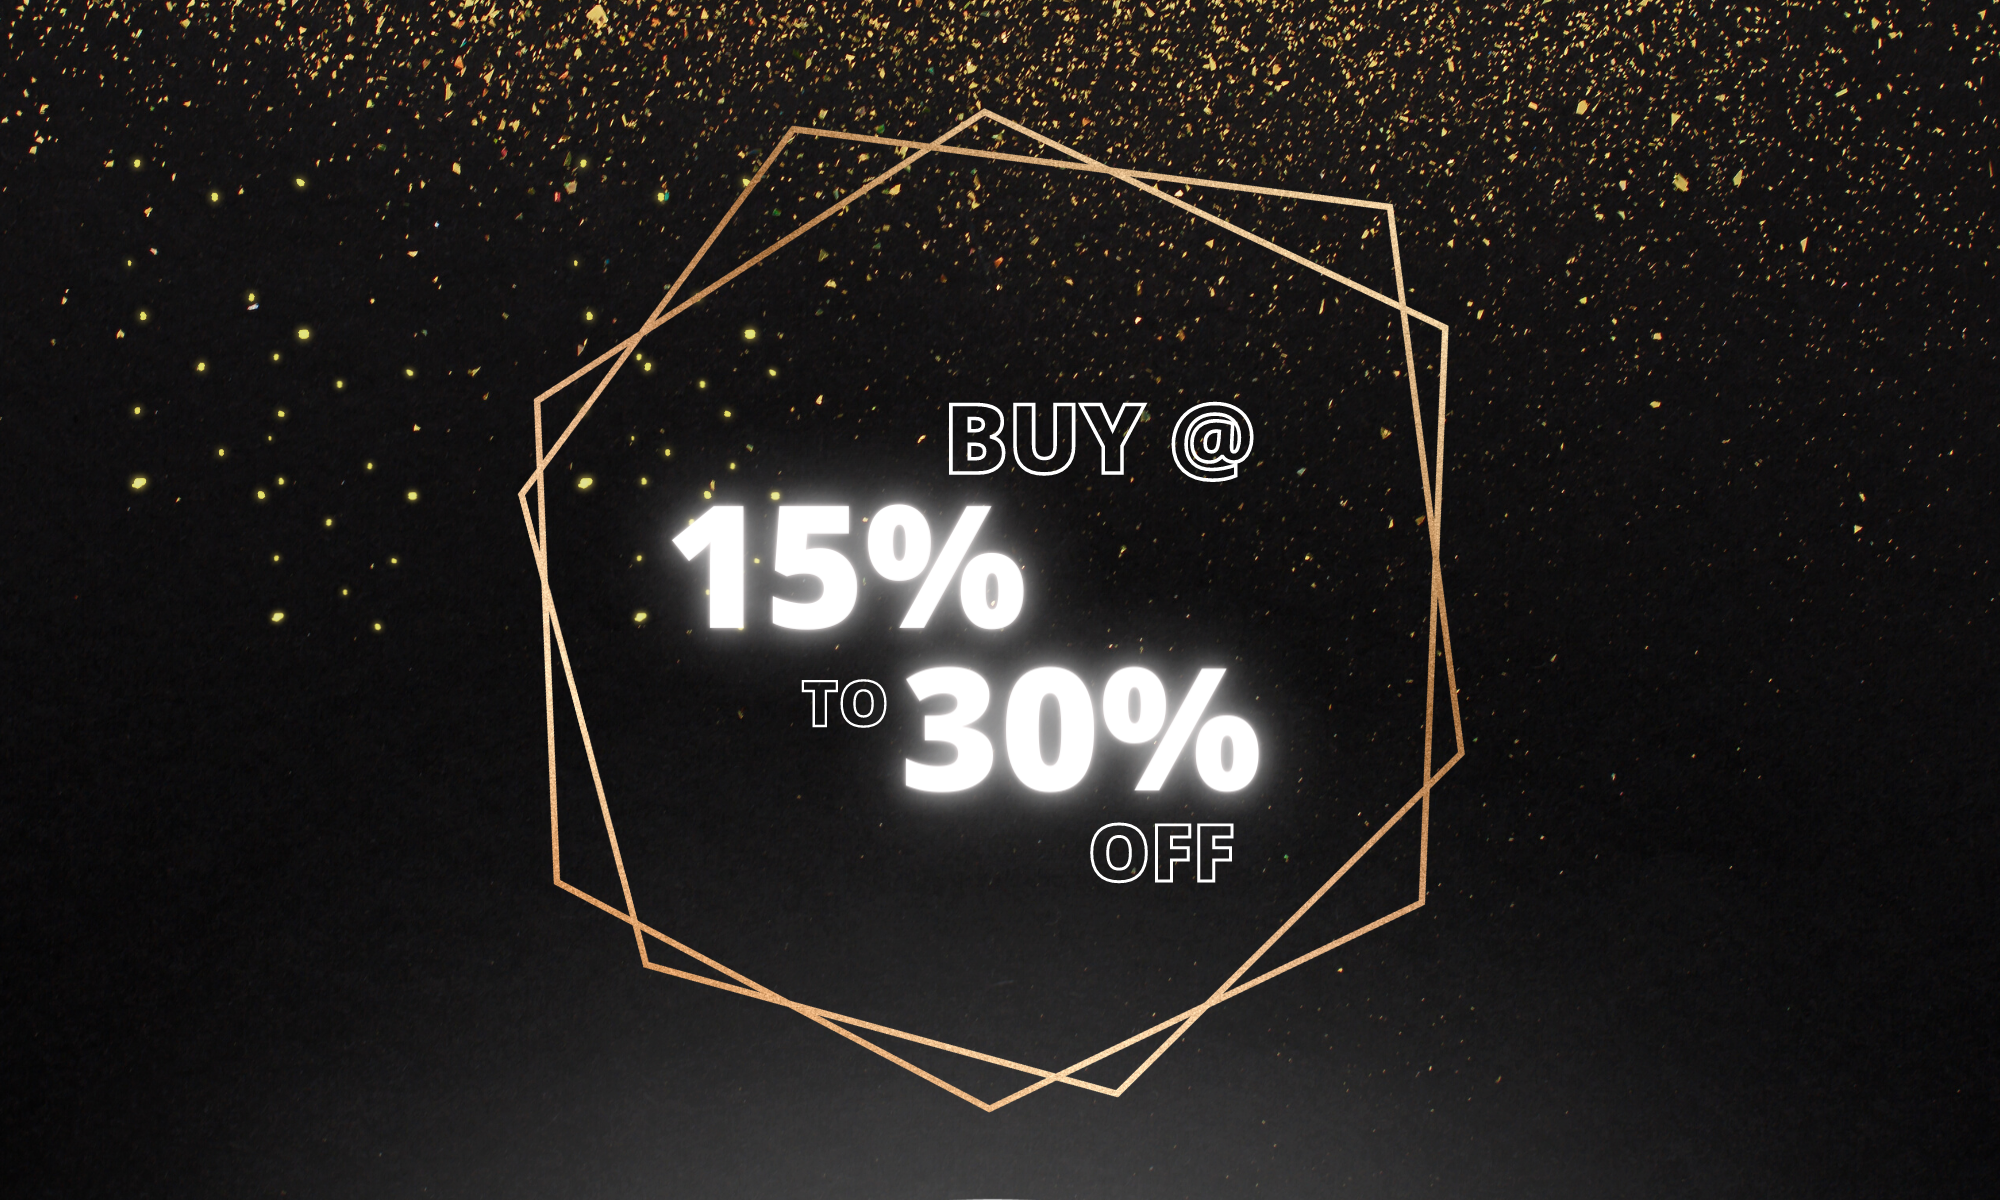 Get 15% to 30% OFF